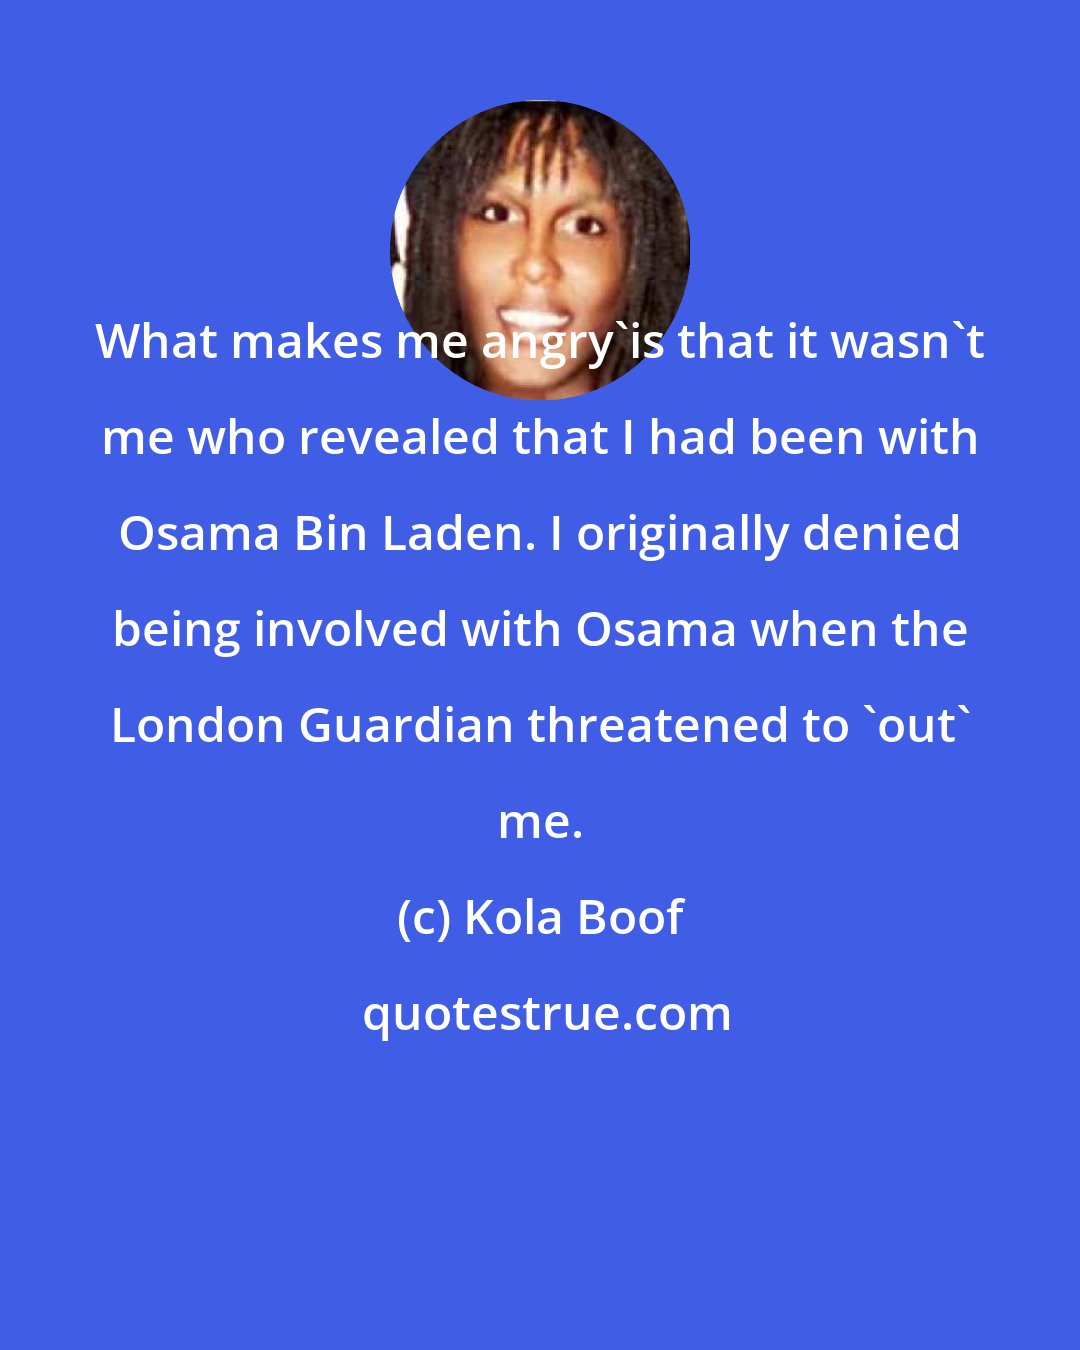 Kola Boof: What makes me angry'is that it wasn't me who revealed that I had been with Osama Bin Laden. I originally denied being involved with Osama when the London Guardian threatened to 'out' me.